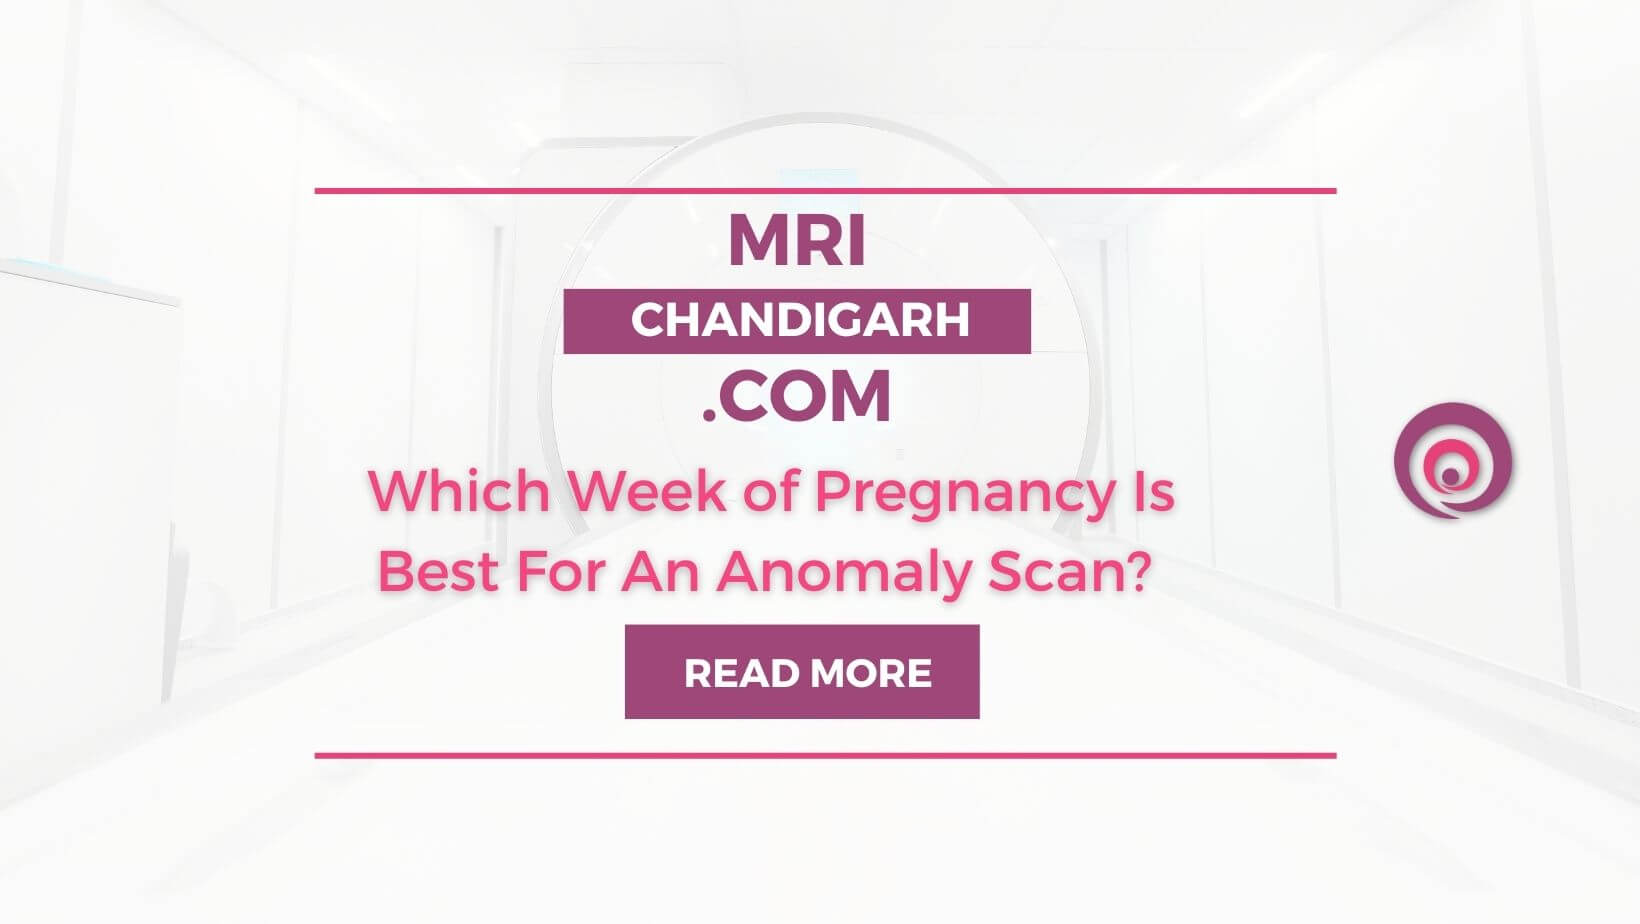 Which Week of Pregnancy Is Best For An Anomaly Scan?